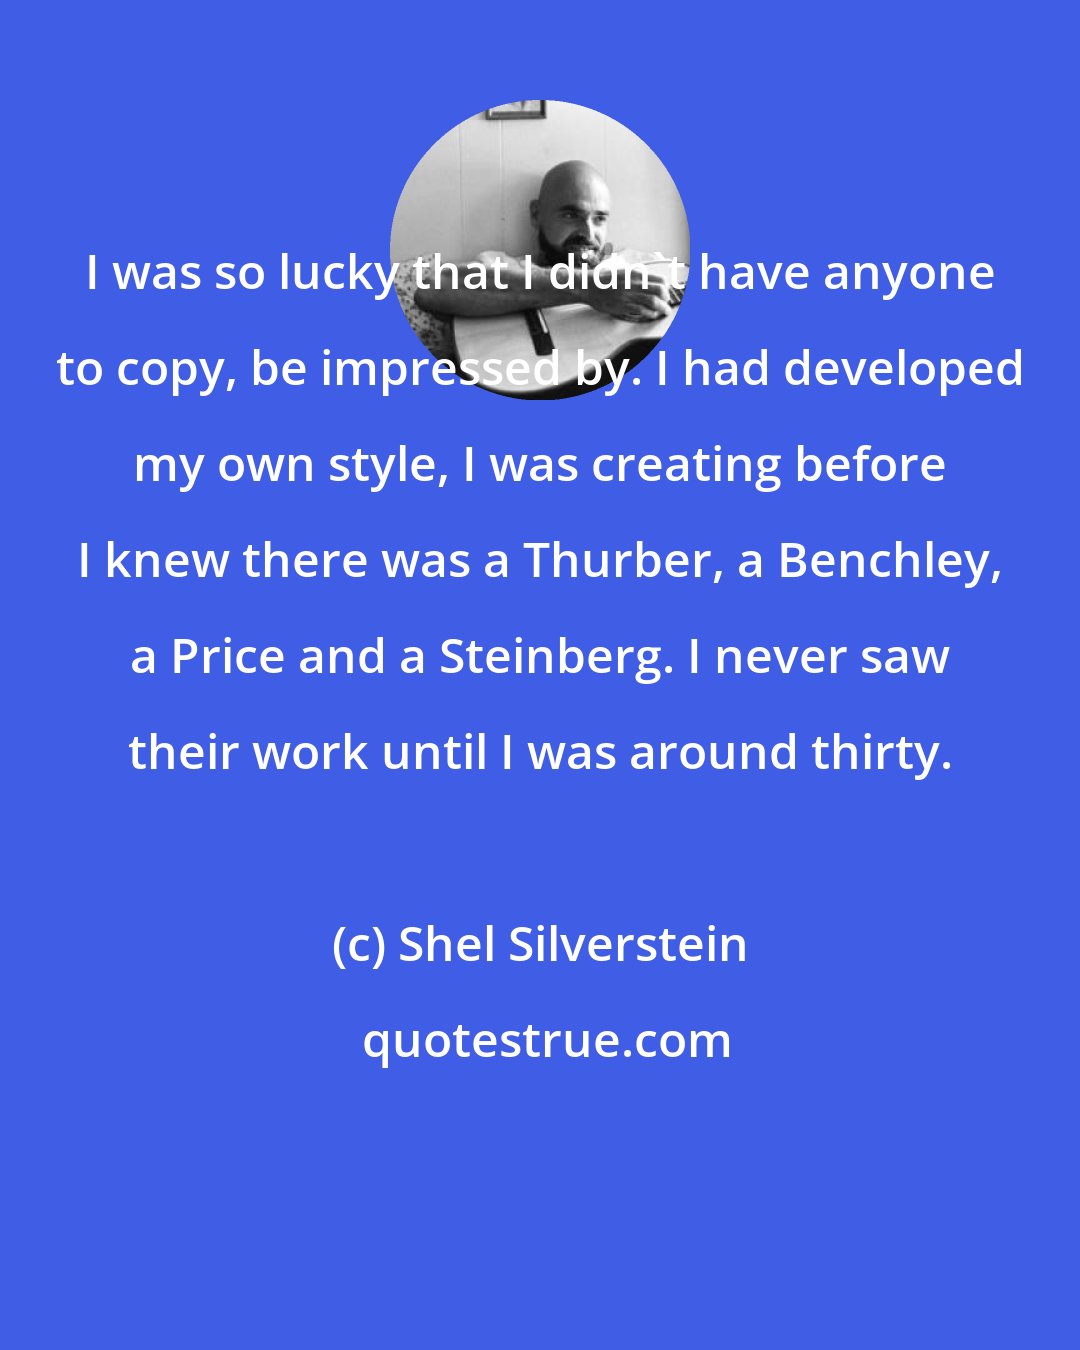 Shel Silverstein: I was so lucky that I didn't have anyone to copy, be impressed by. I had developed my own style, I was creating before I knew there was a Thurber, a Benchley, a Price and a Steinberg. I never saw their work until I was around thirty.